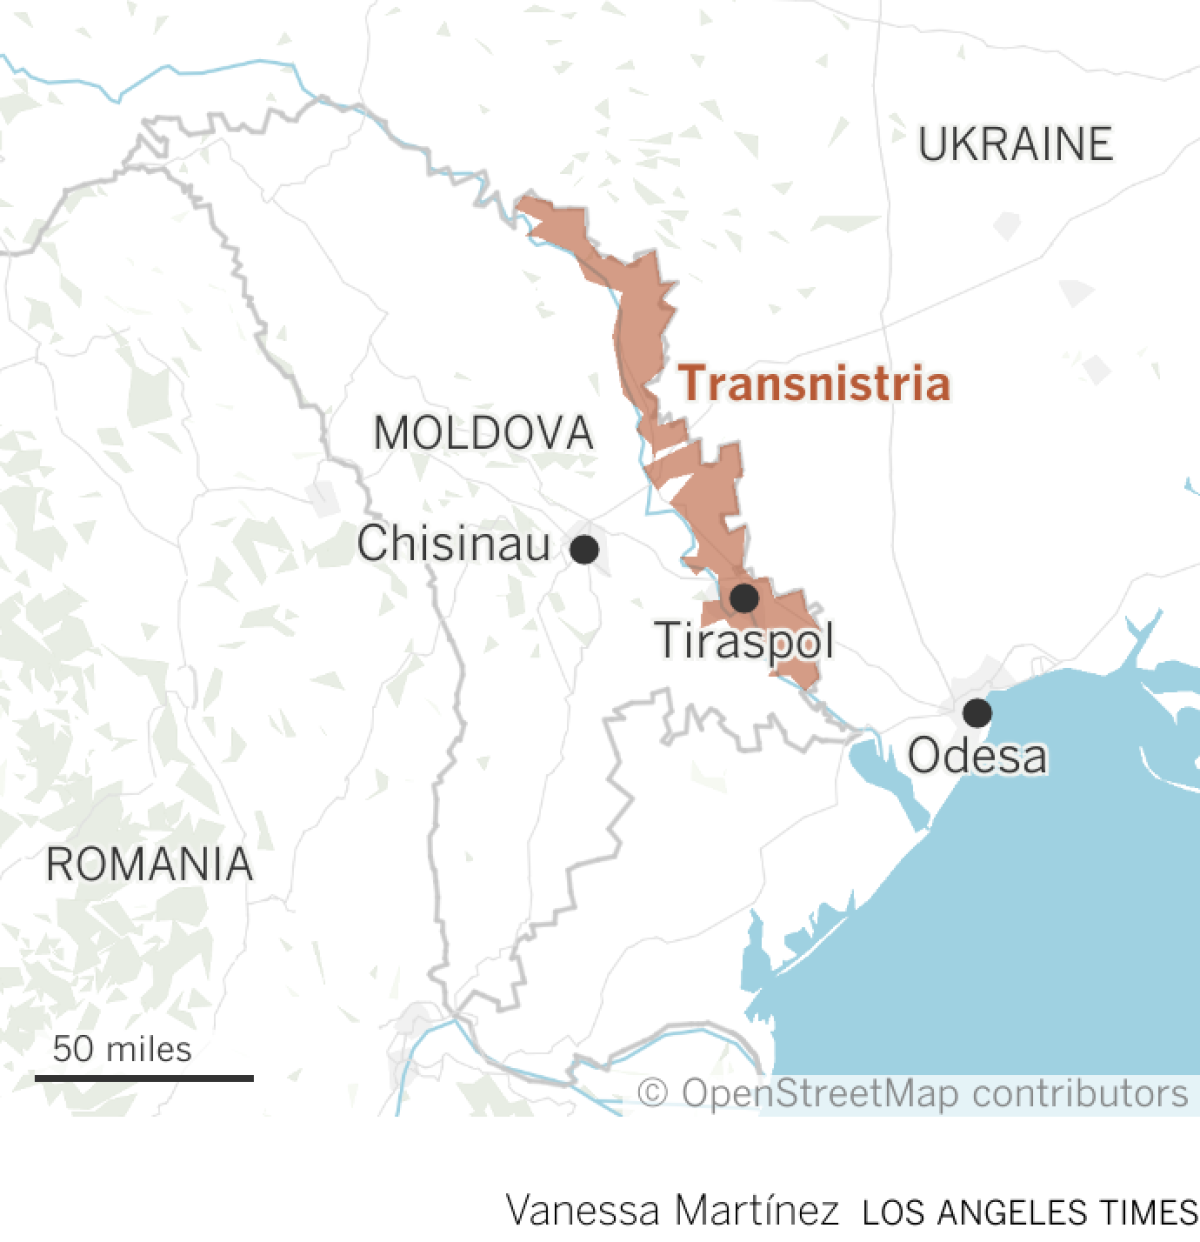 Map highlights Transnistria, located along Moldova's eastern border with Ukraine.